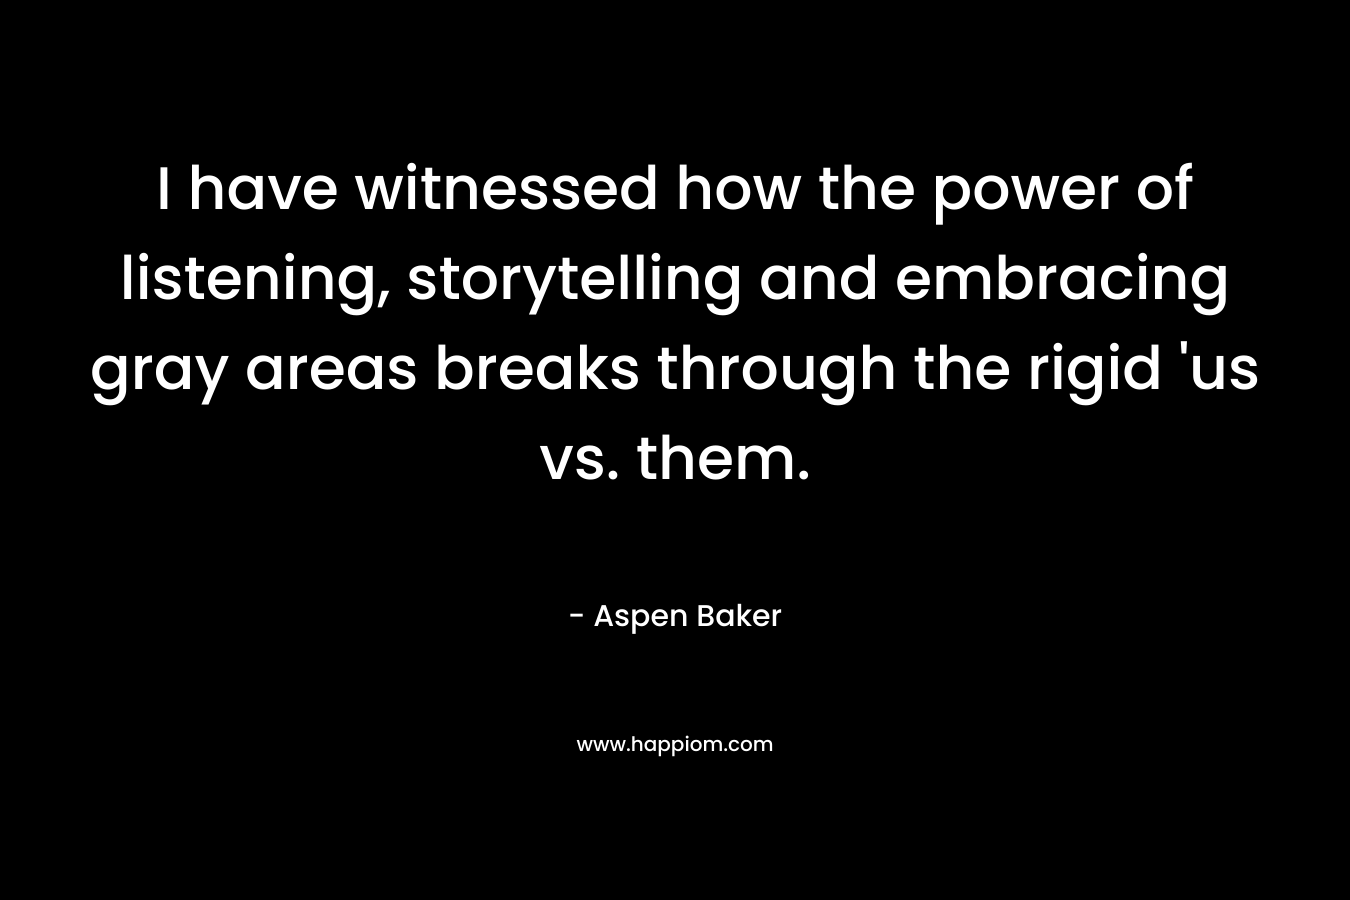 I have witnessed how the power of listening, storytelling and embracing gray areas breaks through the rigid 'us vs. them.